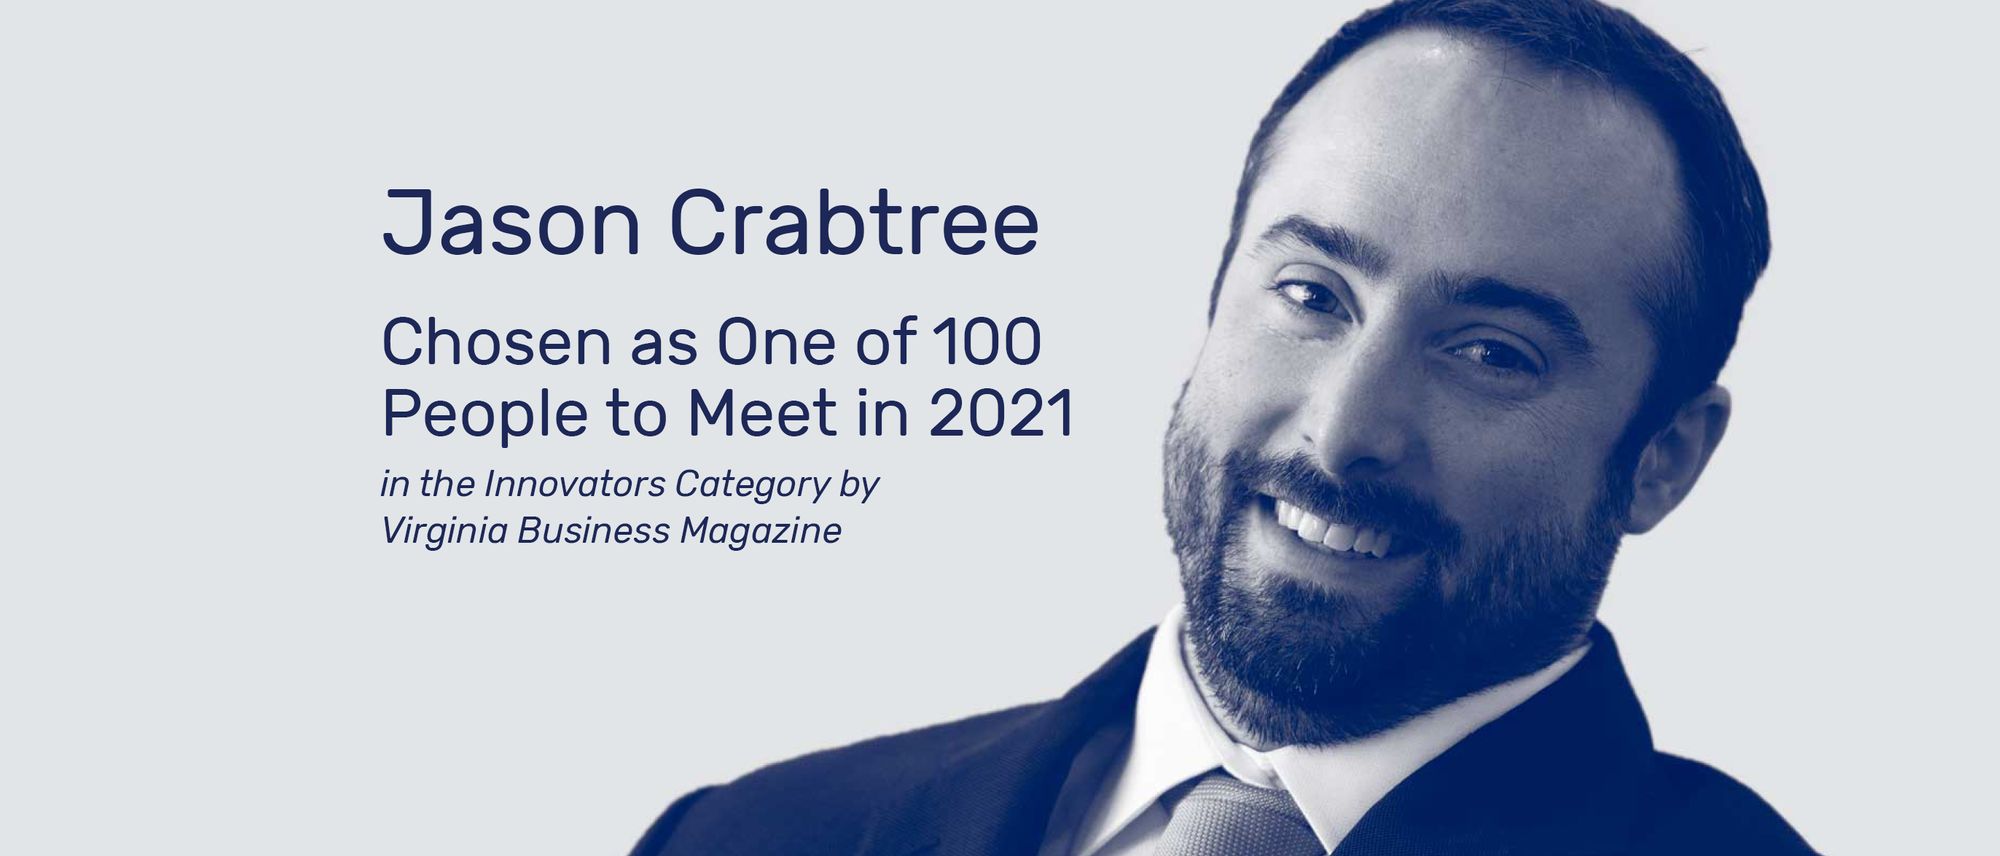 Virginia Business Magazine names CEO Crabtree one of "100 People To Meet" in 2021